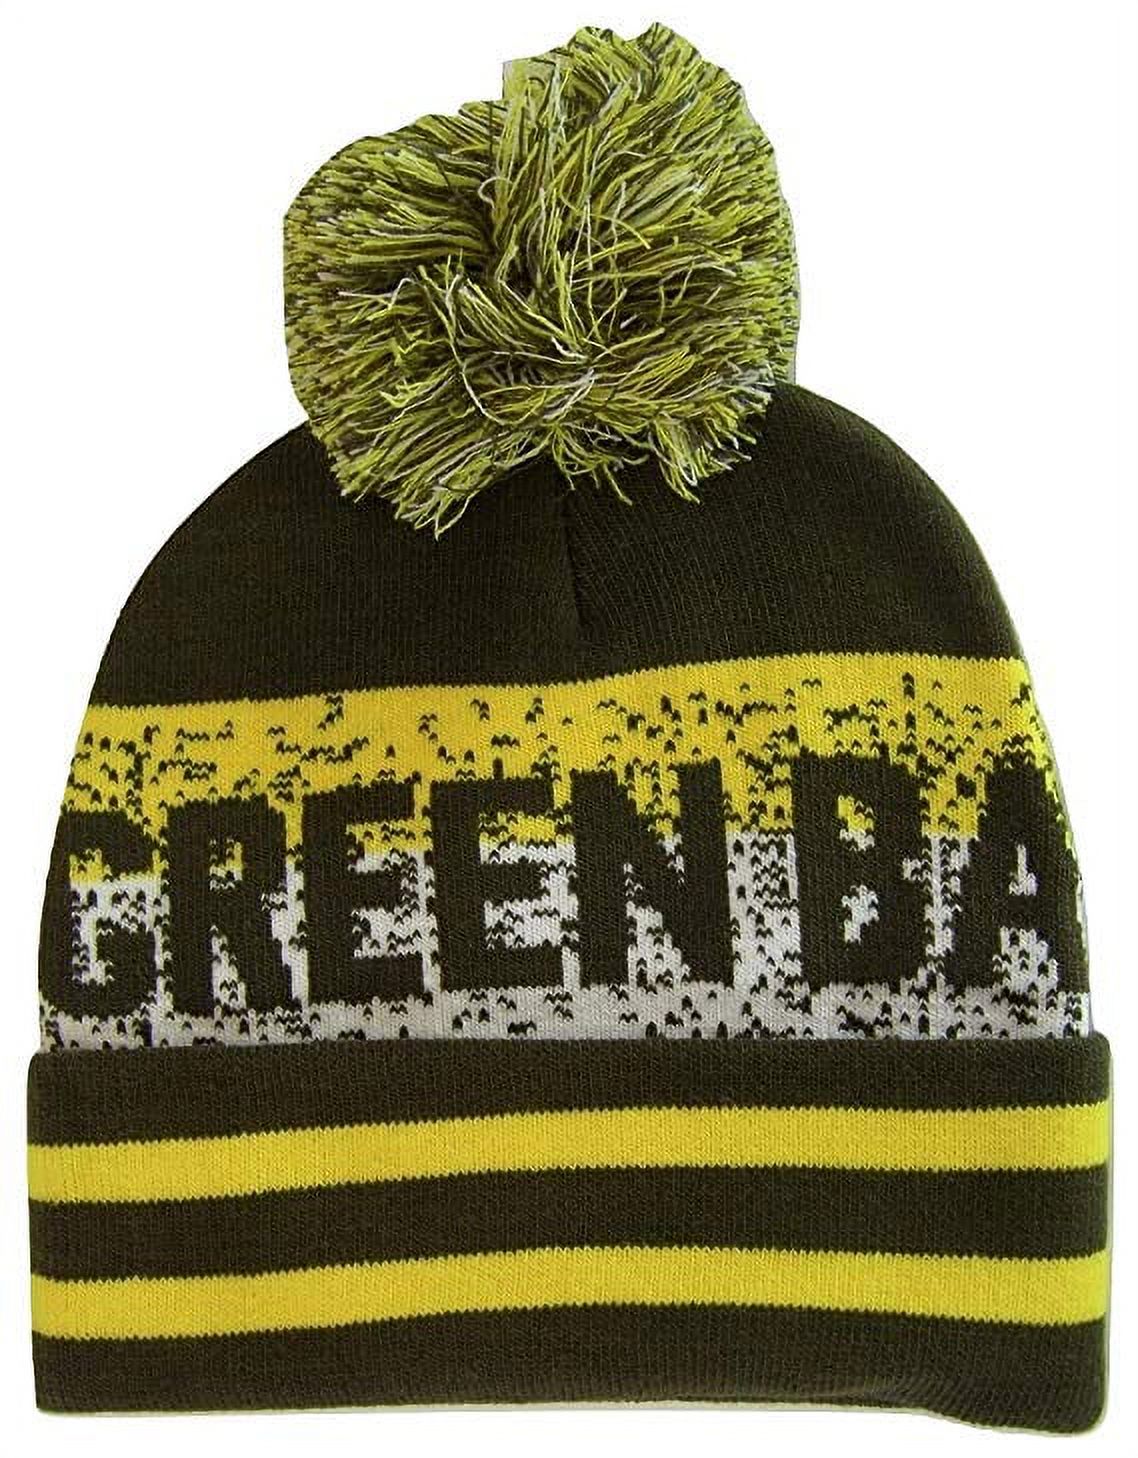 Green Bay Pixelated Adult Size Winter Knit Pom Beanie Hat (Dark Green/Gold) - image 1 of 2